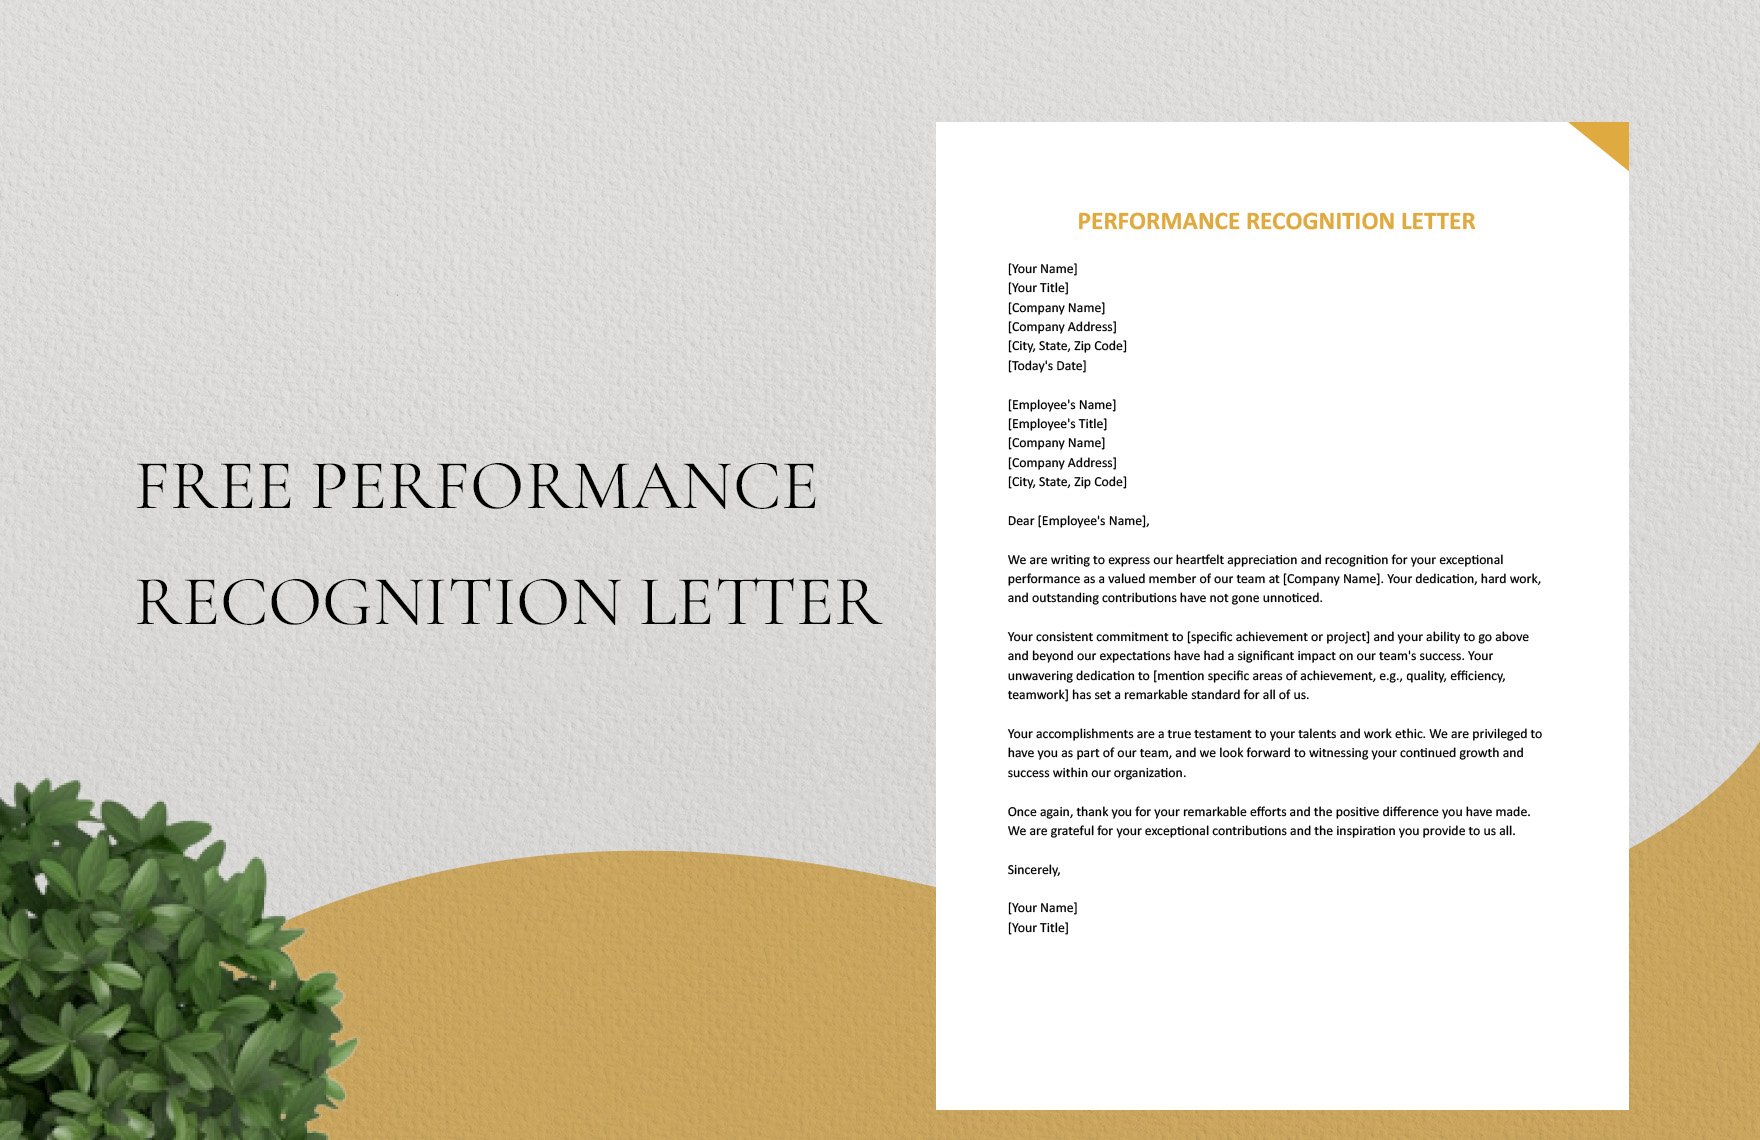 Performance Recognition Letter